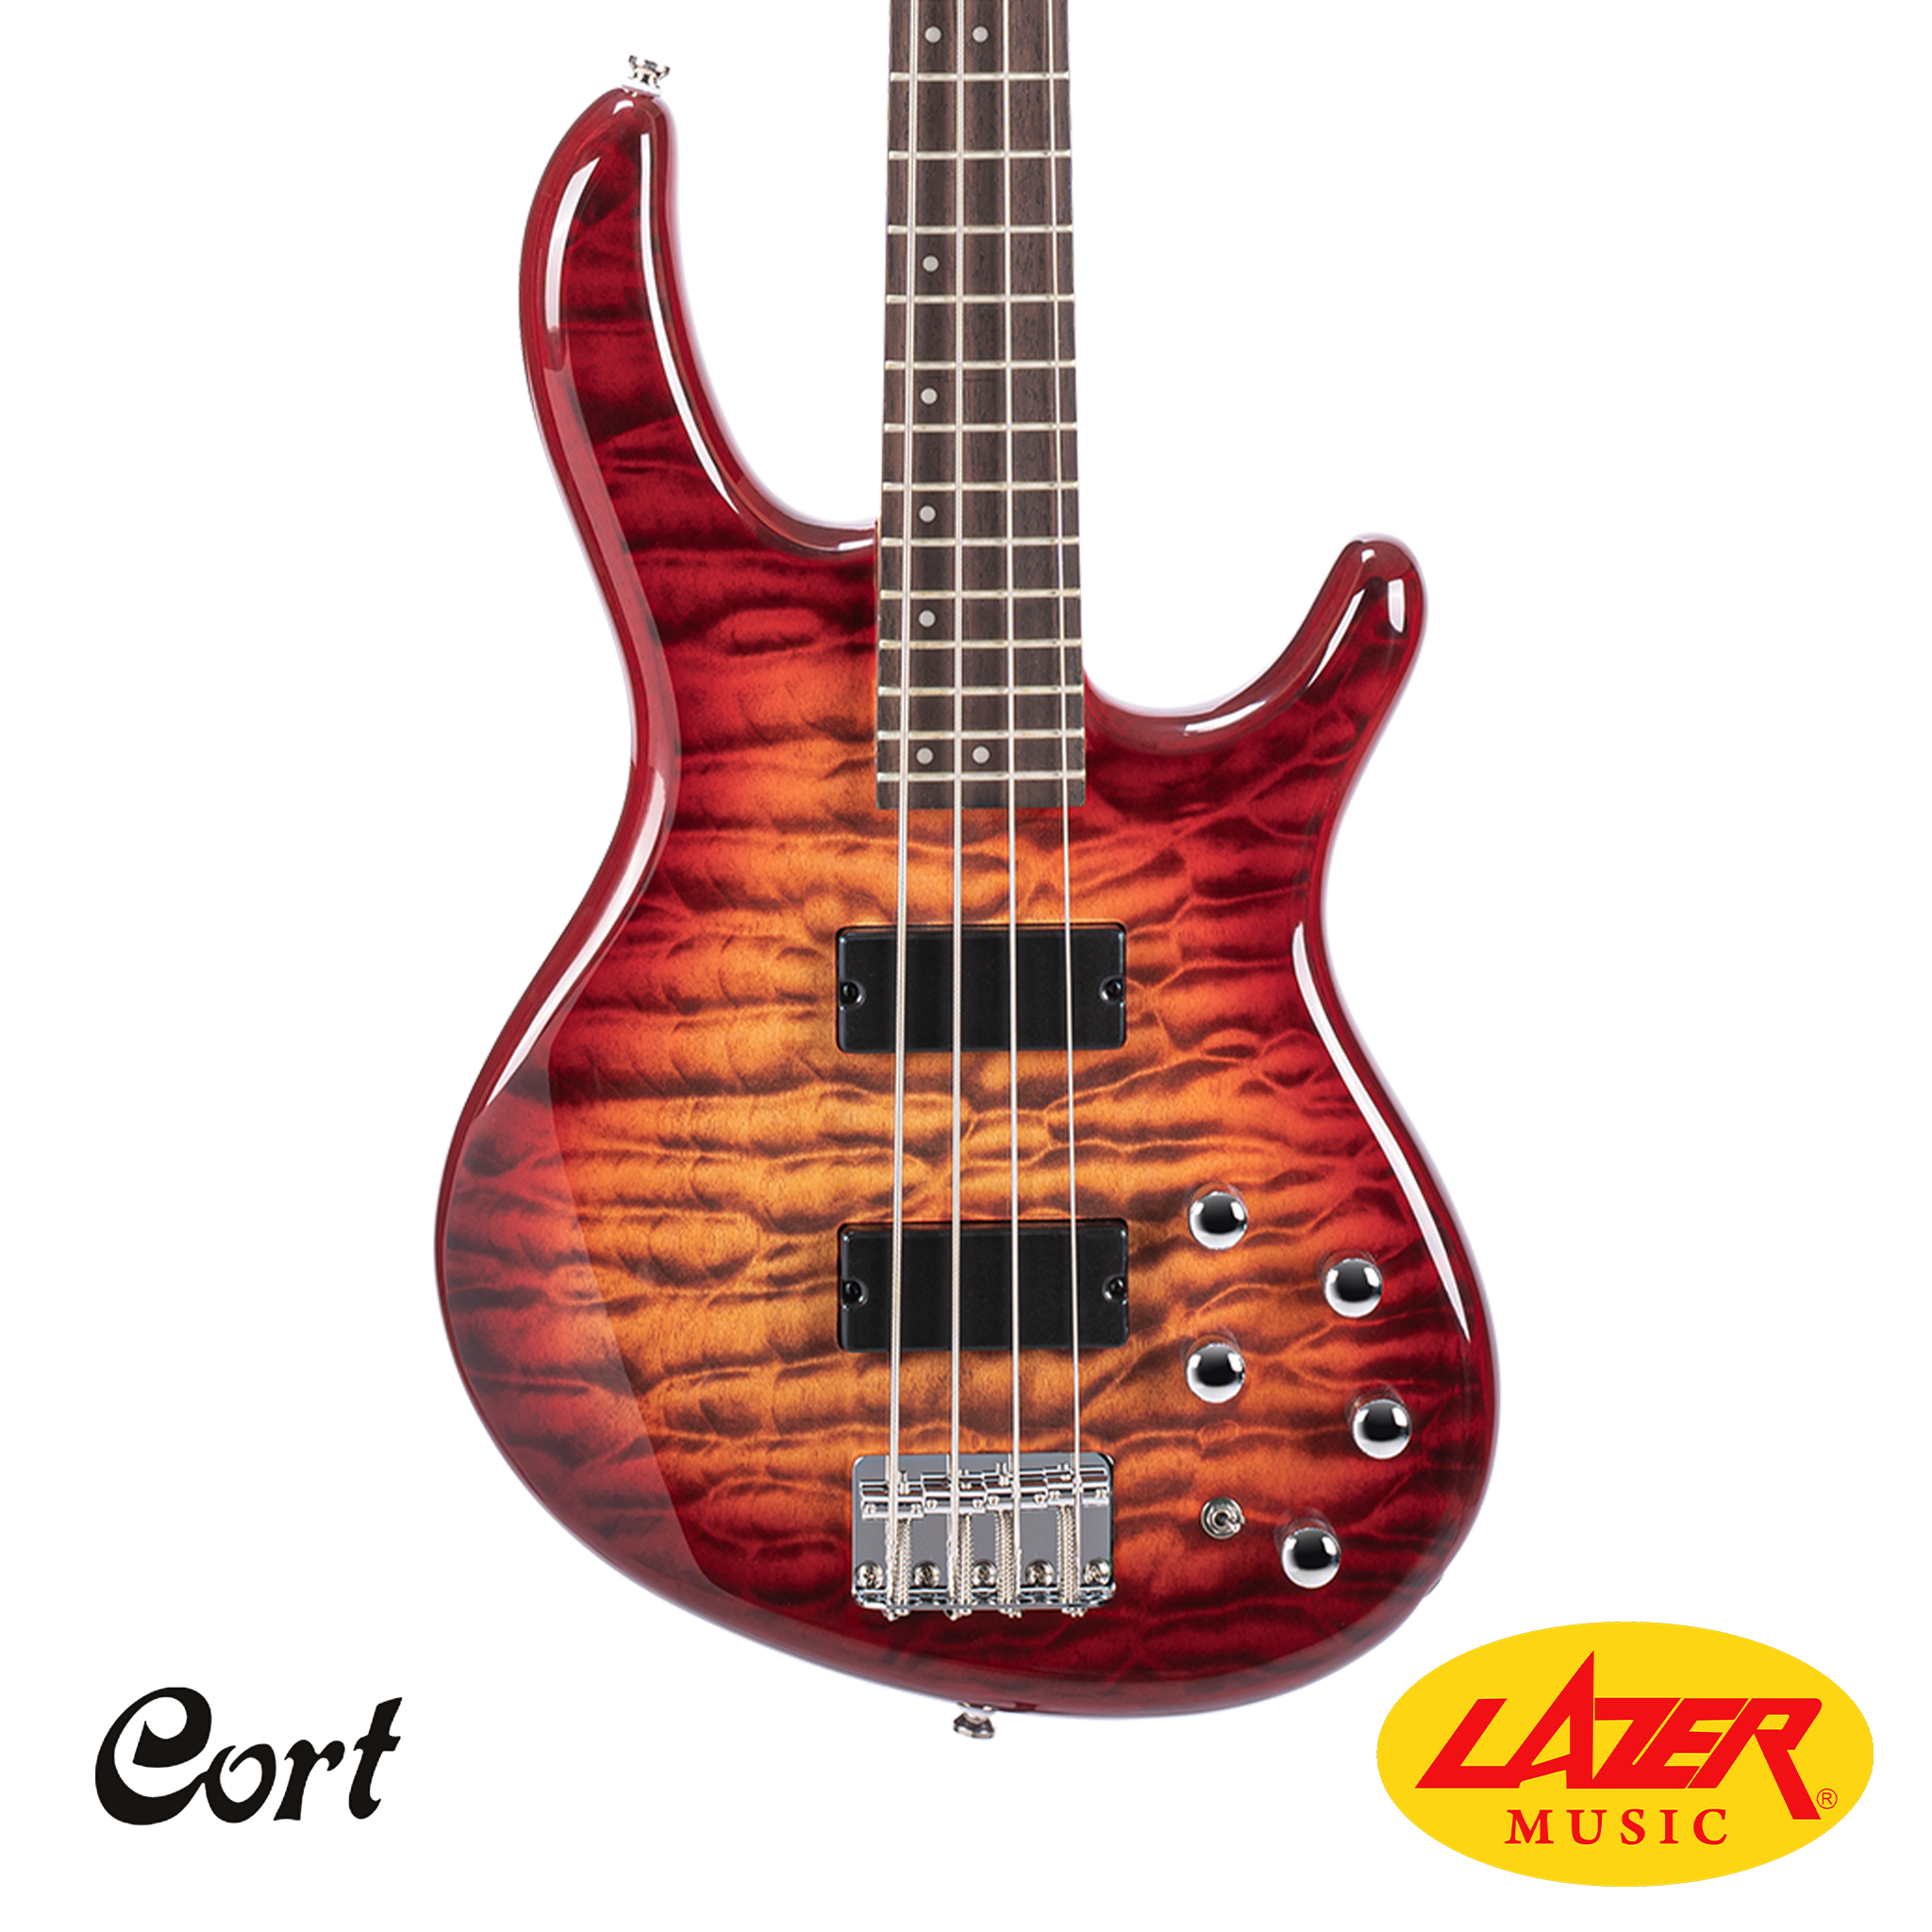 Cort DLX-PLUS Bass Guitar With Hard Maple Neck, Markbass EQ, and Bag